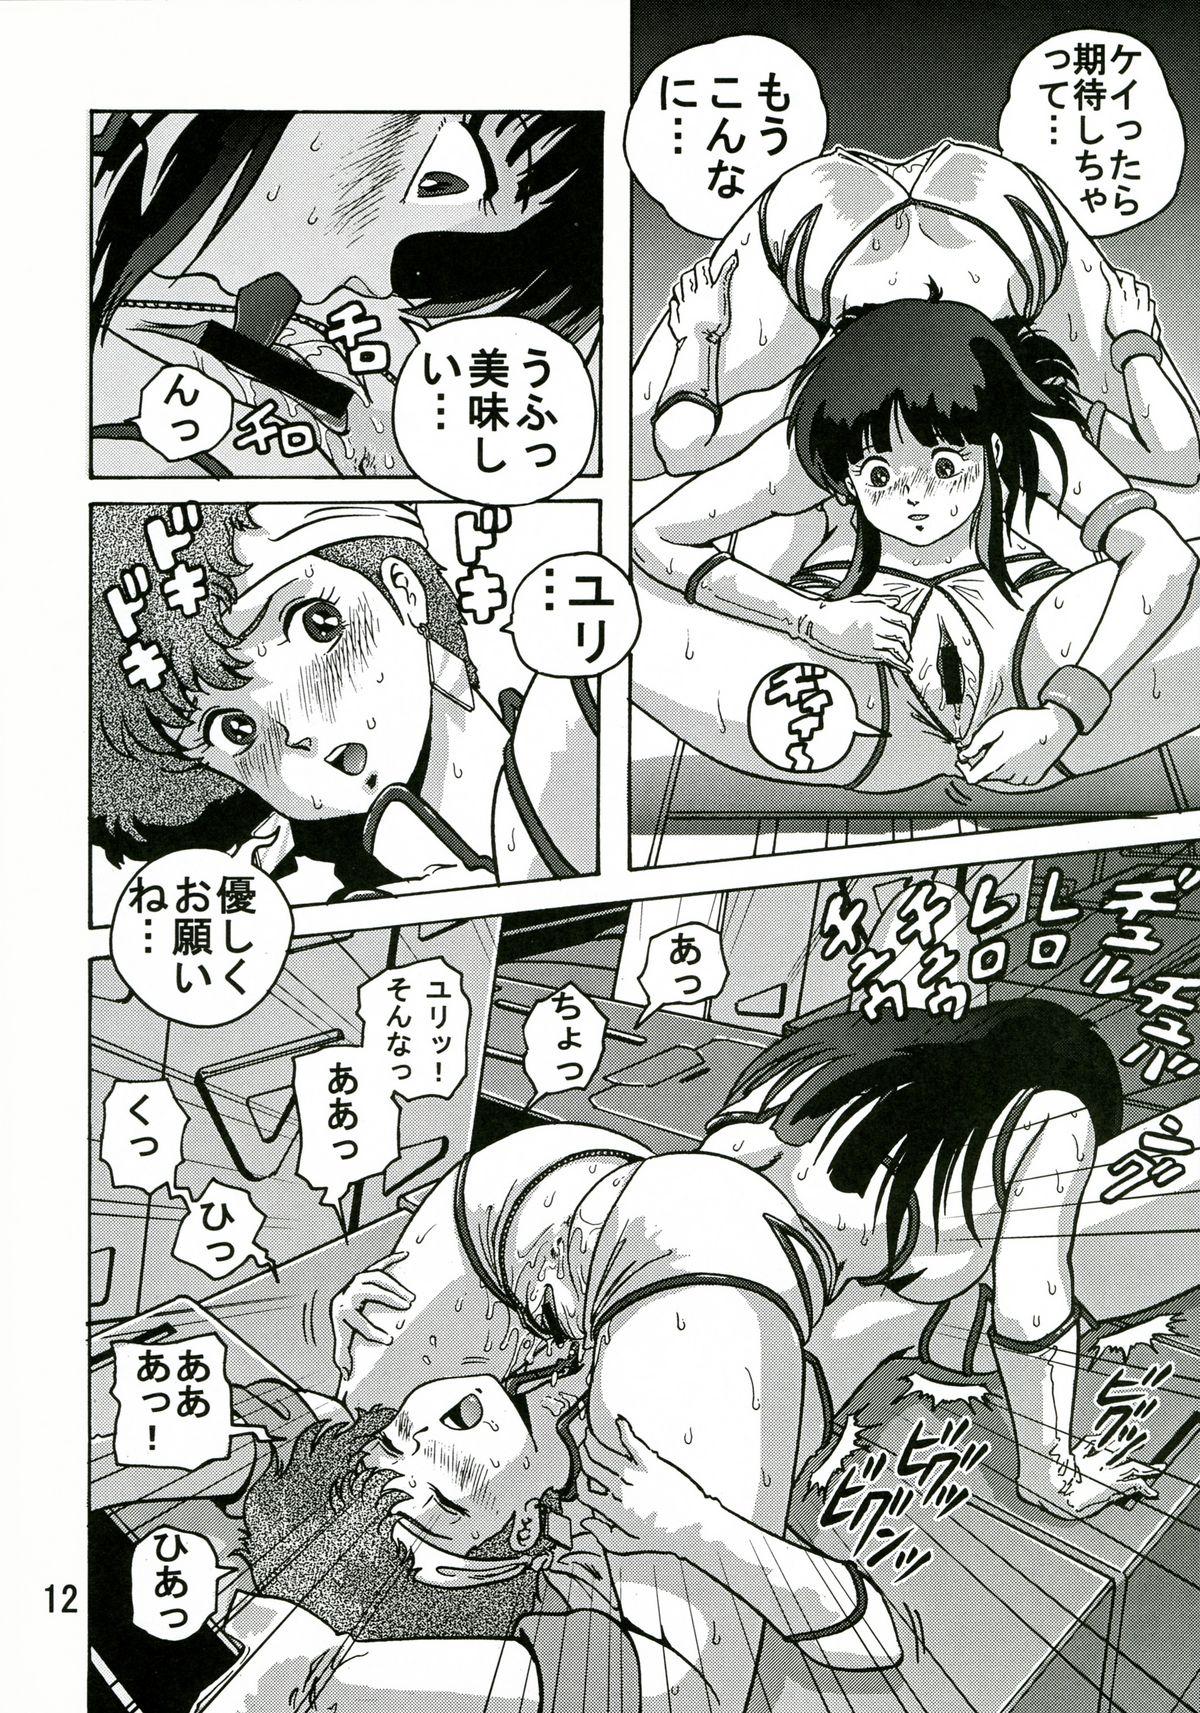 No Condom Love Angel 2 - Dirty pair Muscular - Page 11